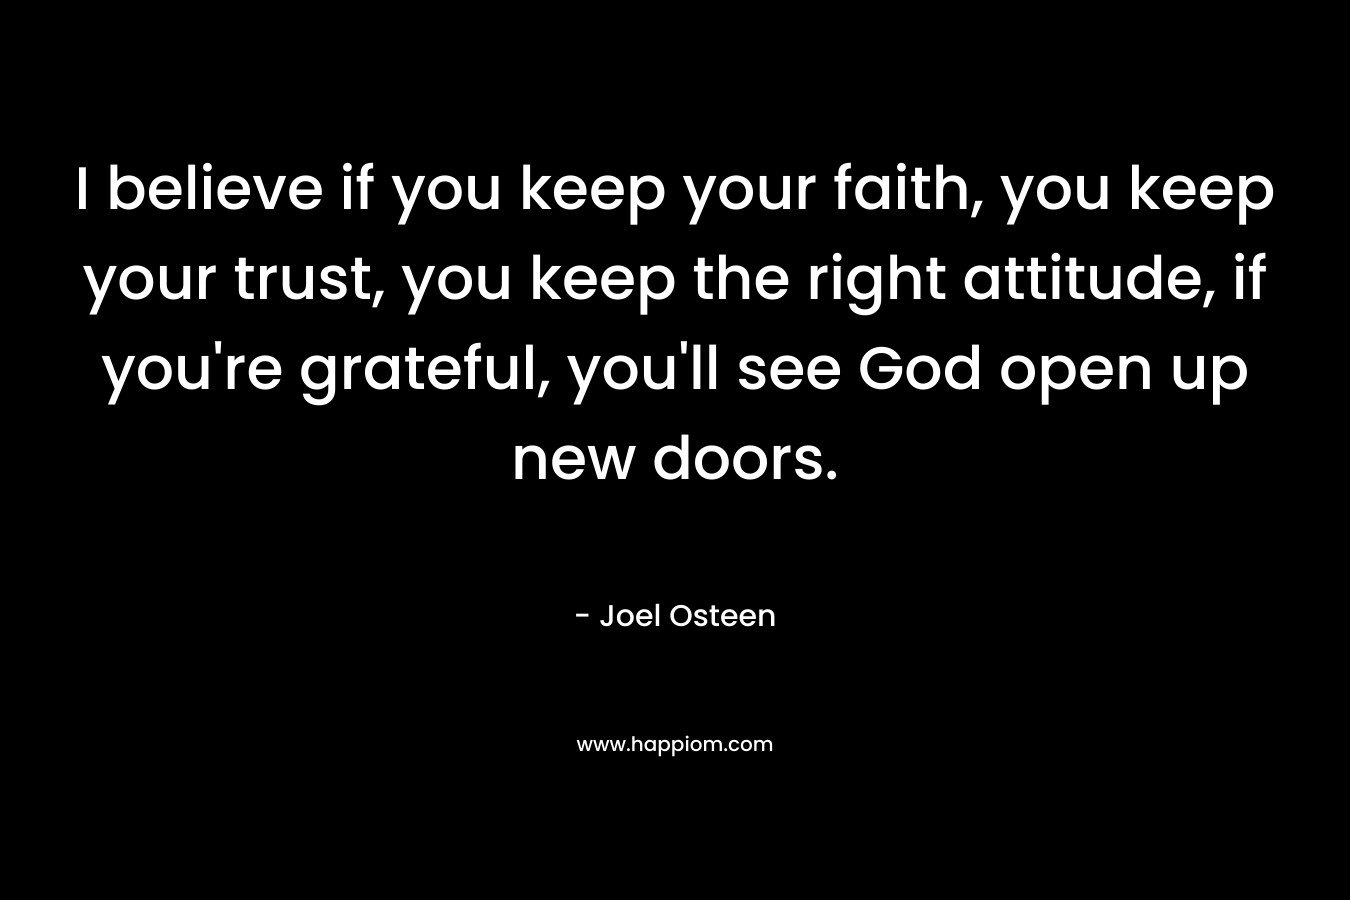 I believe if you keep your faith, you keep your trust, you keep the right attitude, if you’re grateful, you’ll see God open up new doors. – Joel Osteen